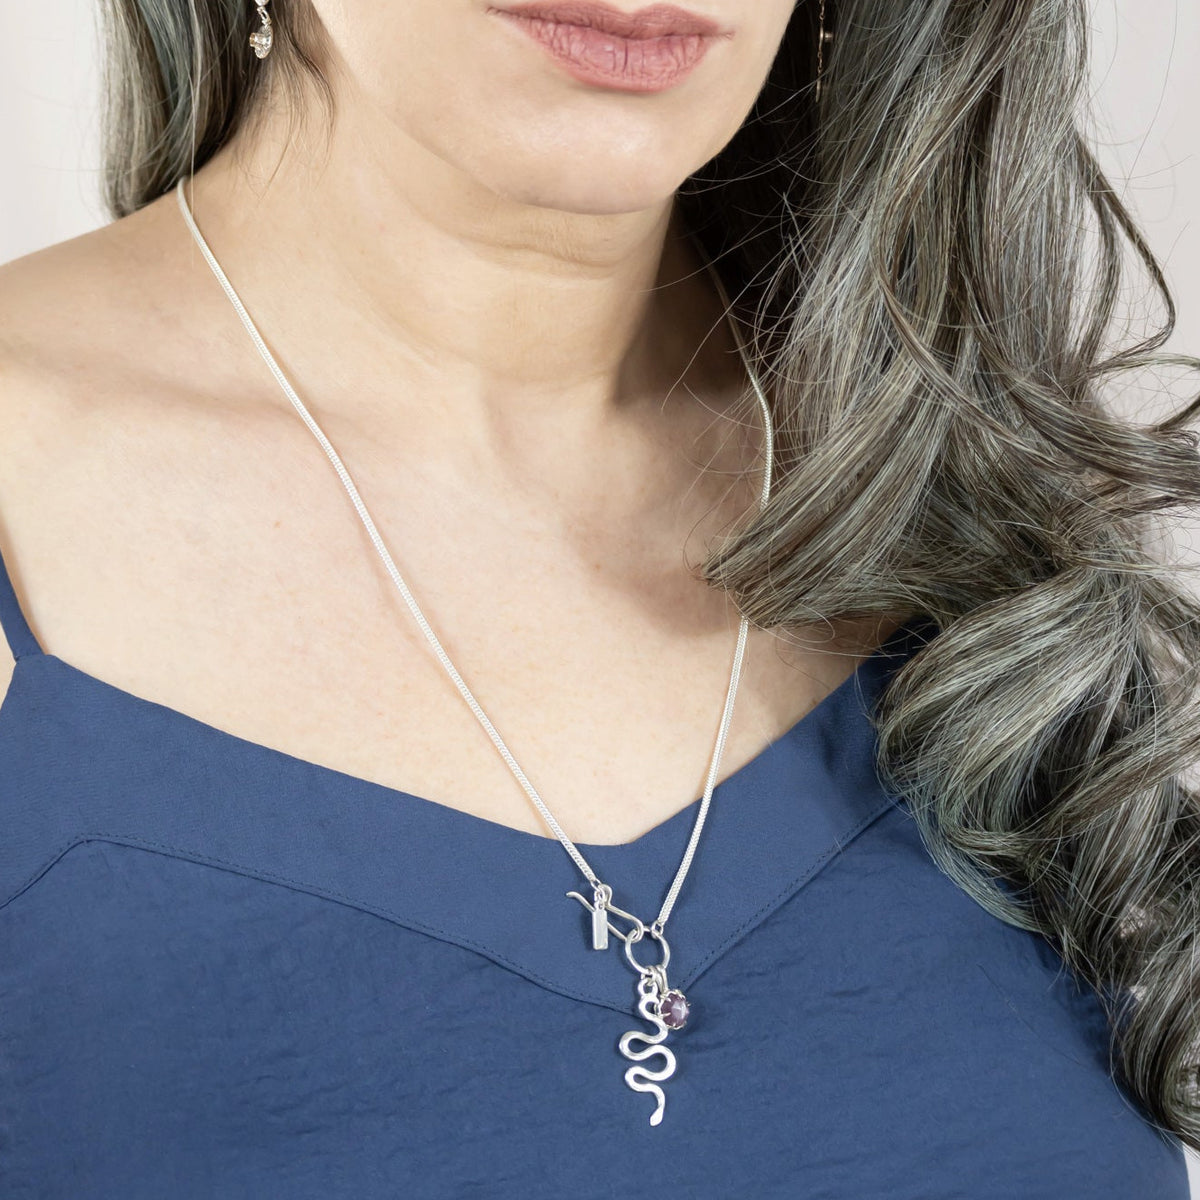 Walk Me Home Pendant Necklace in 925 Silver